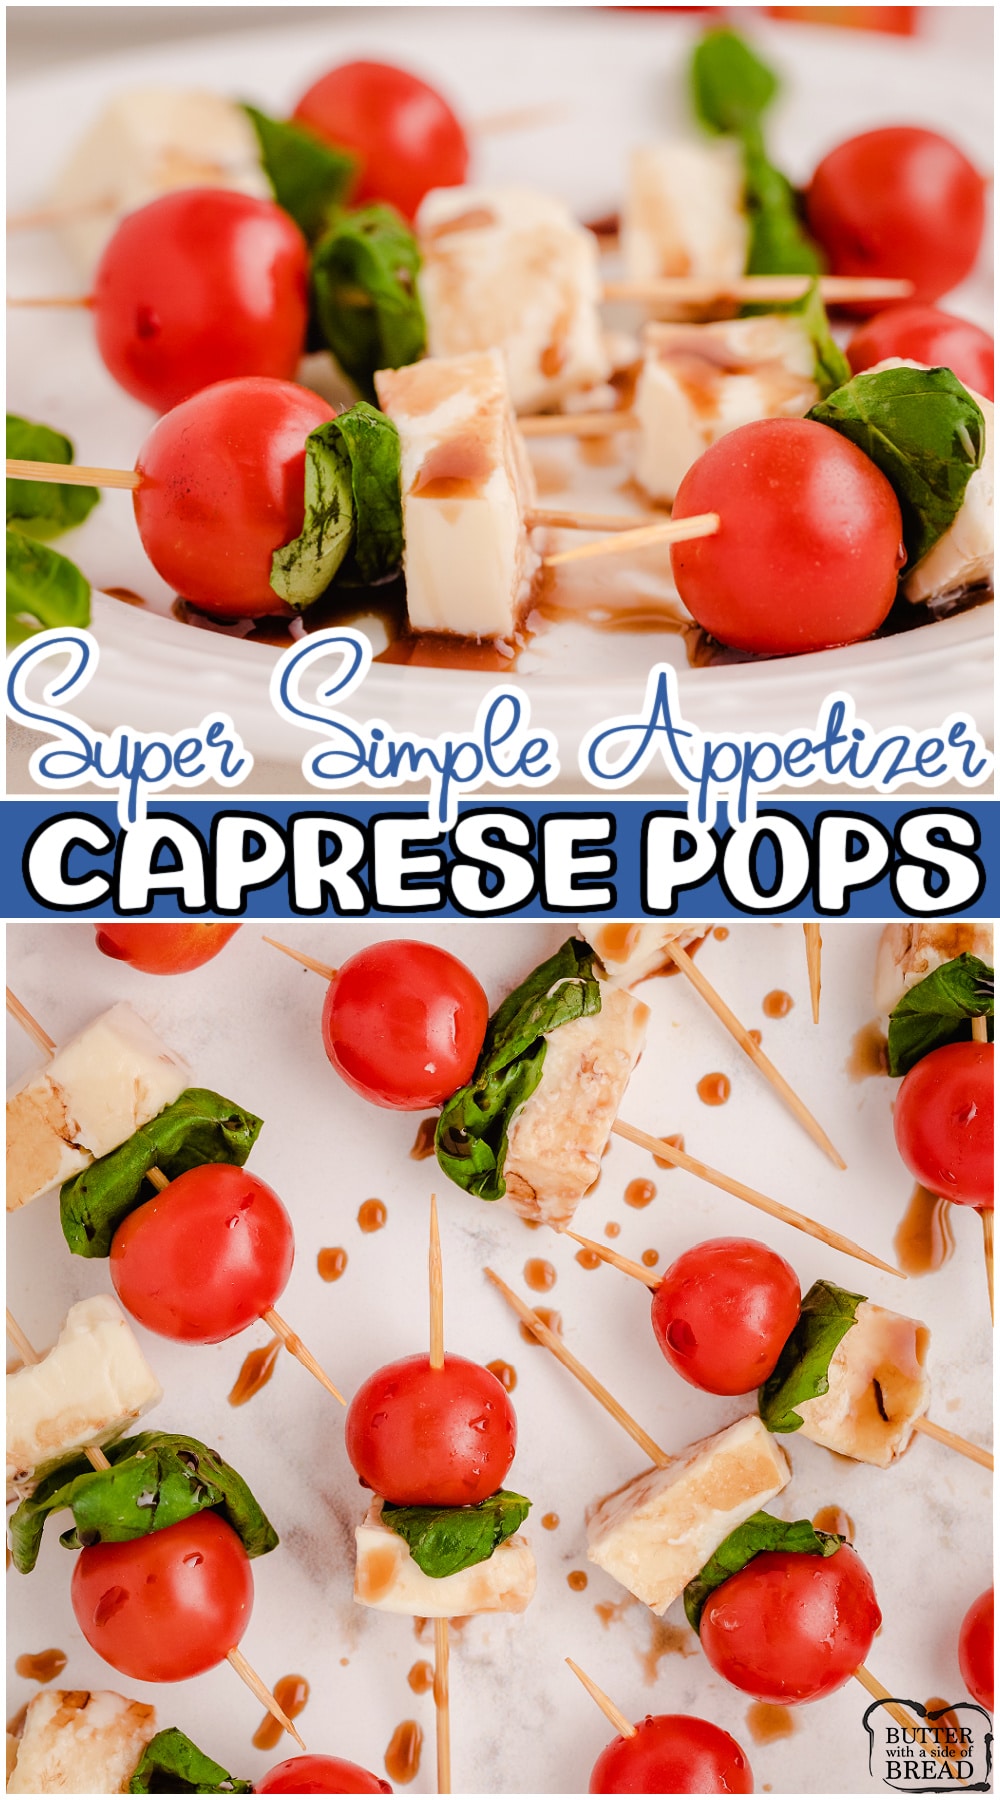 Caprese pops made in minutes with just 3 ingredients: cherry tomatoes, fresh mozzarella & basil! Fresh, flavorful & popular appetizer perfect for parties or game day! 